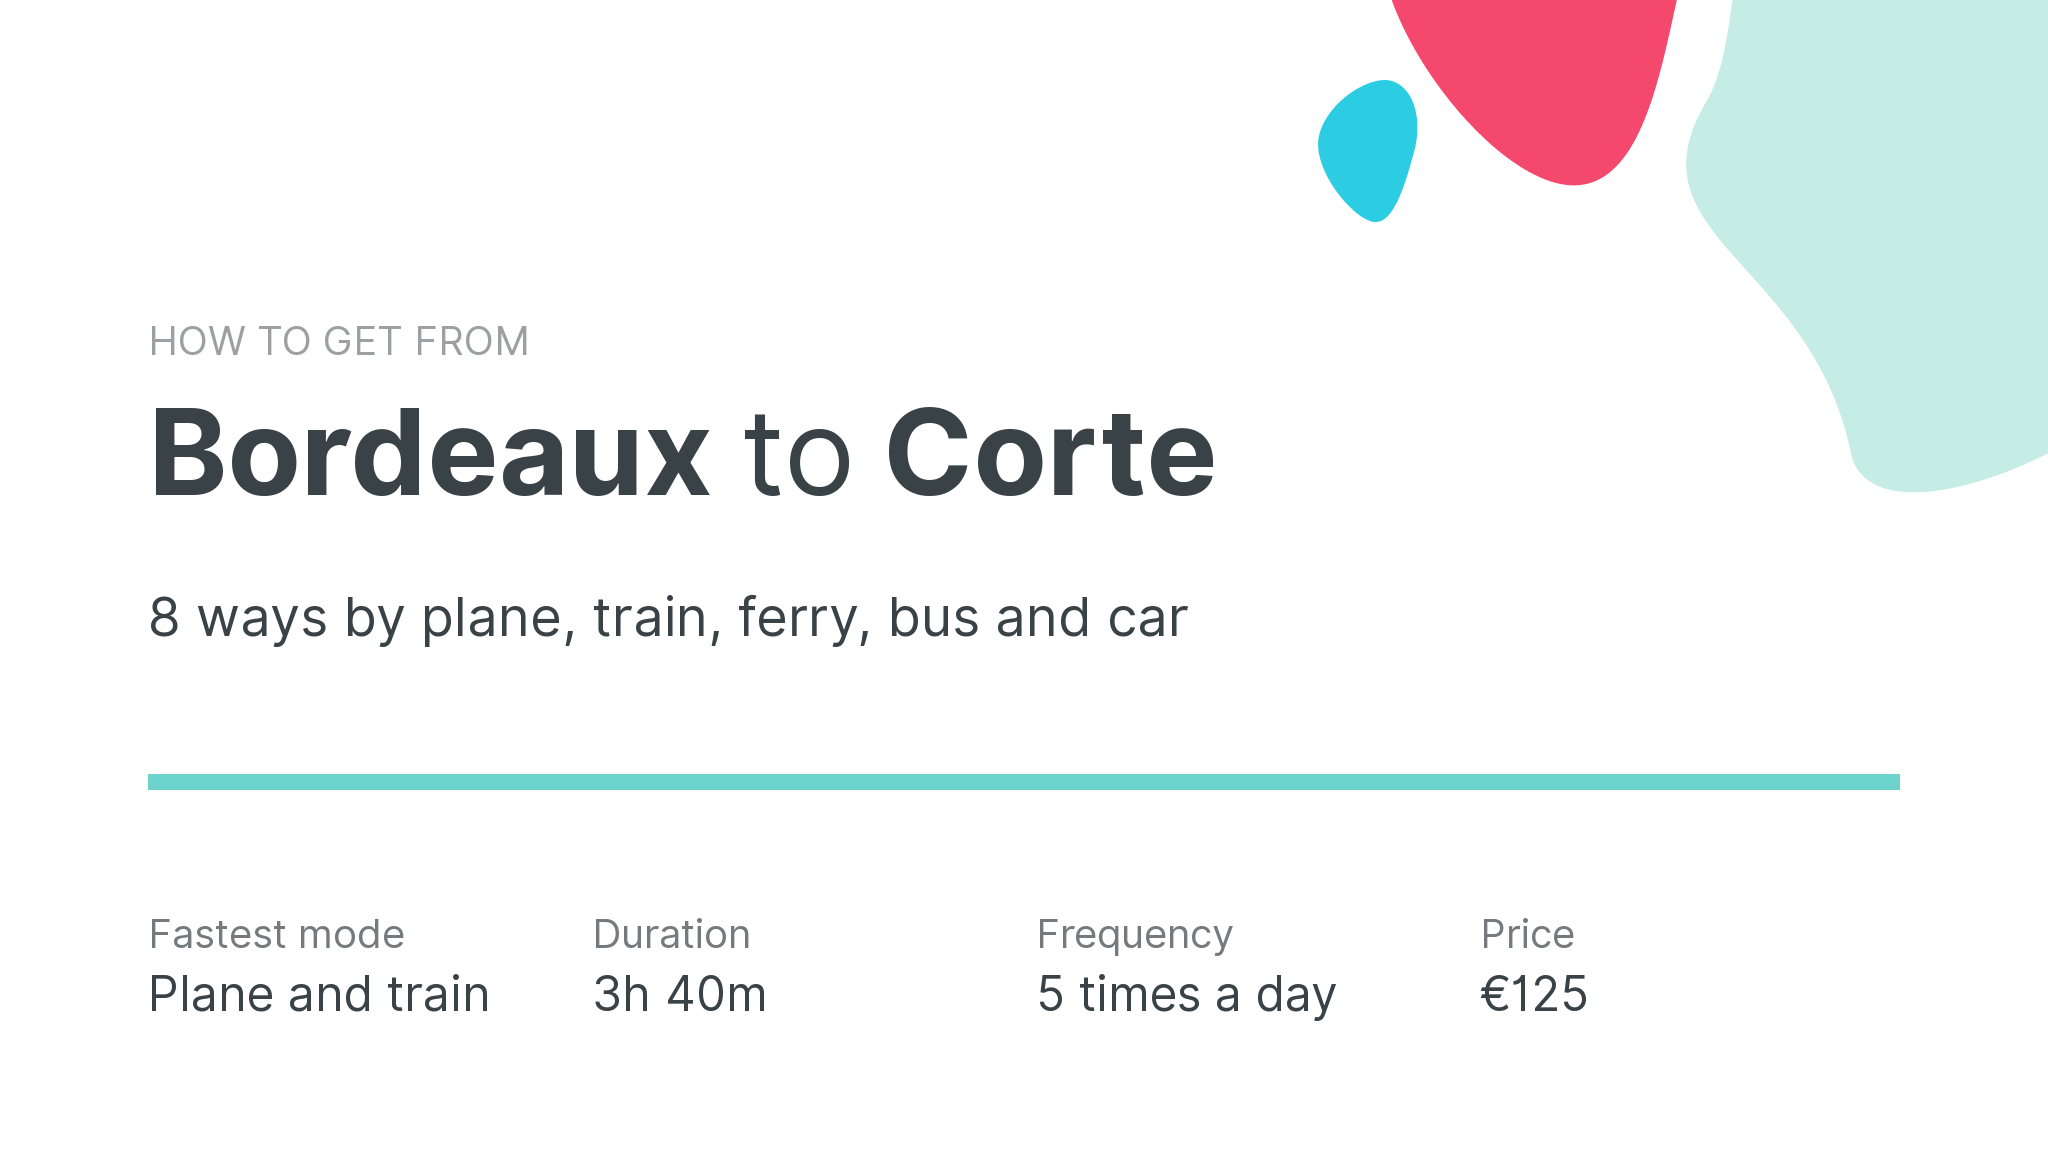 How do I get from Bordeaux to Corte